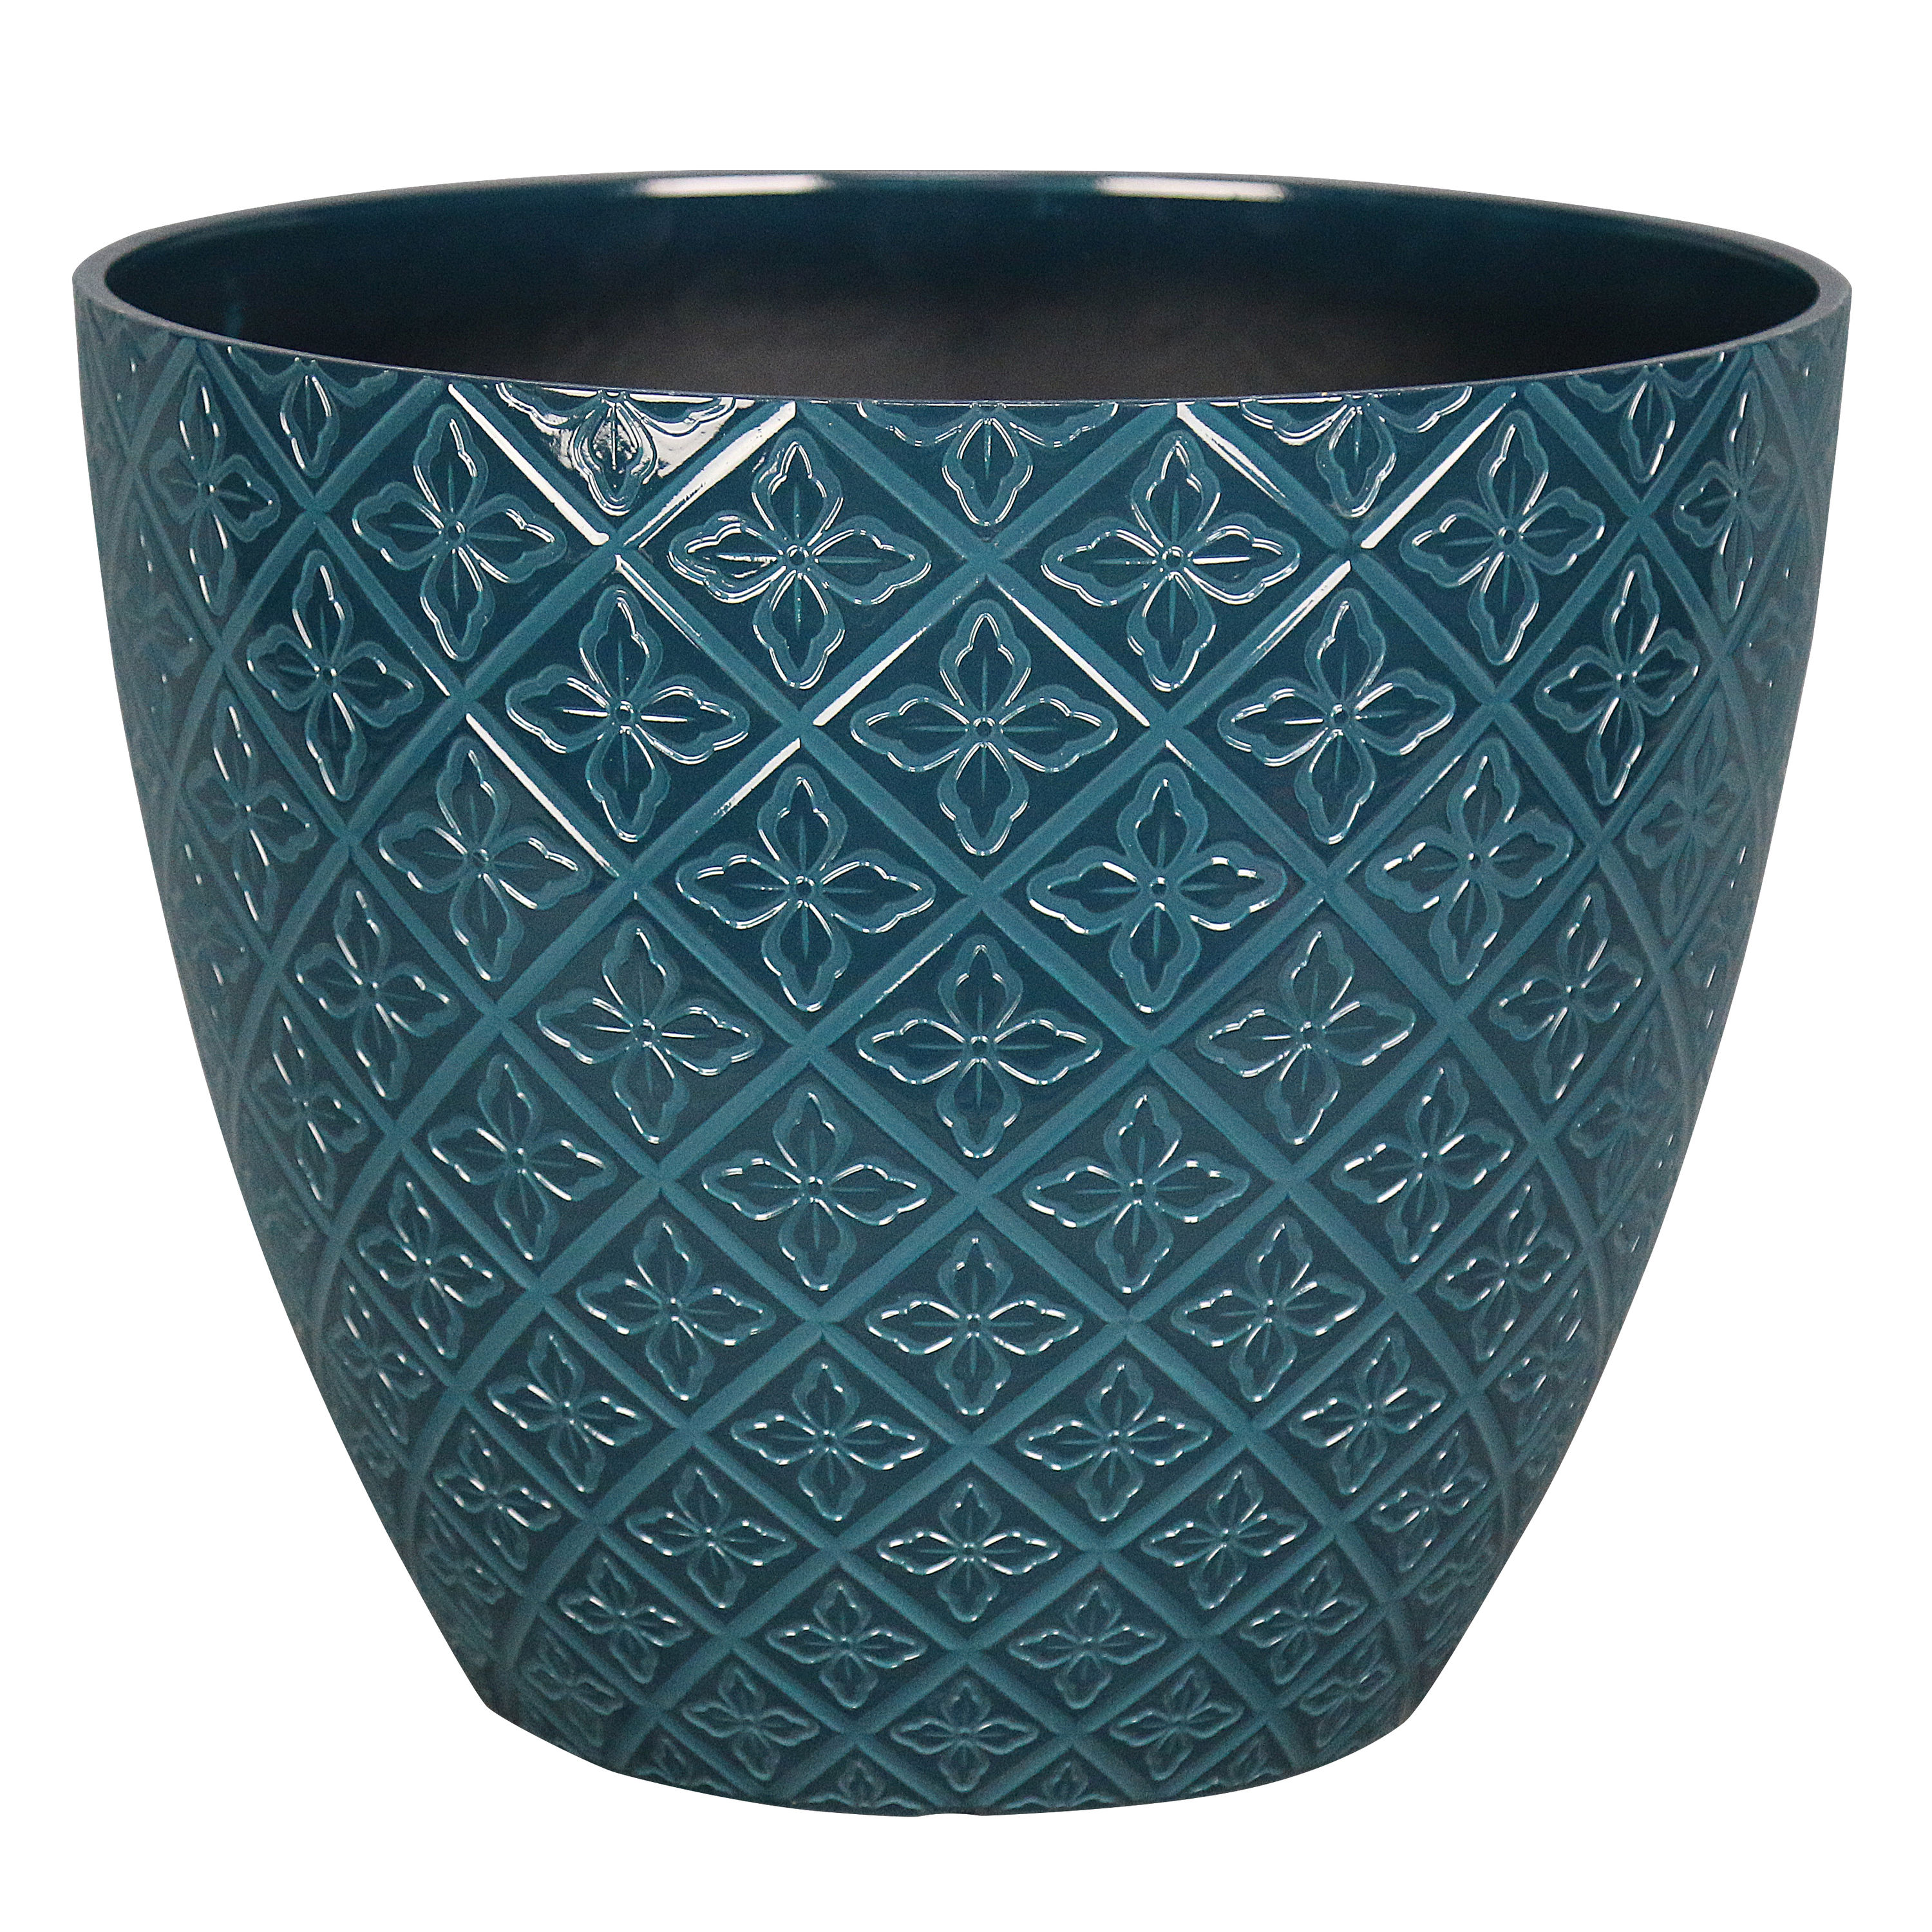 11.34-in W x 9.33-in H Teal Resin Contemporary/Modern Indoor/Outdoor Planter in Green | - allen + roth PLD2112PTG